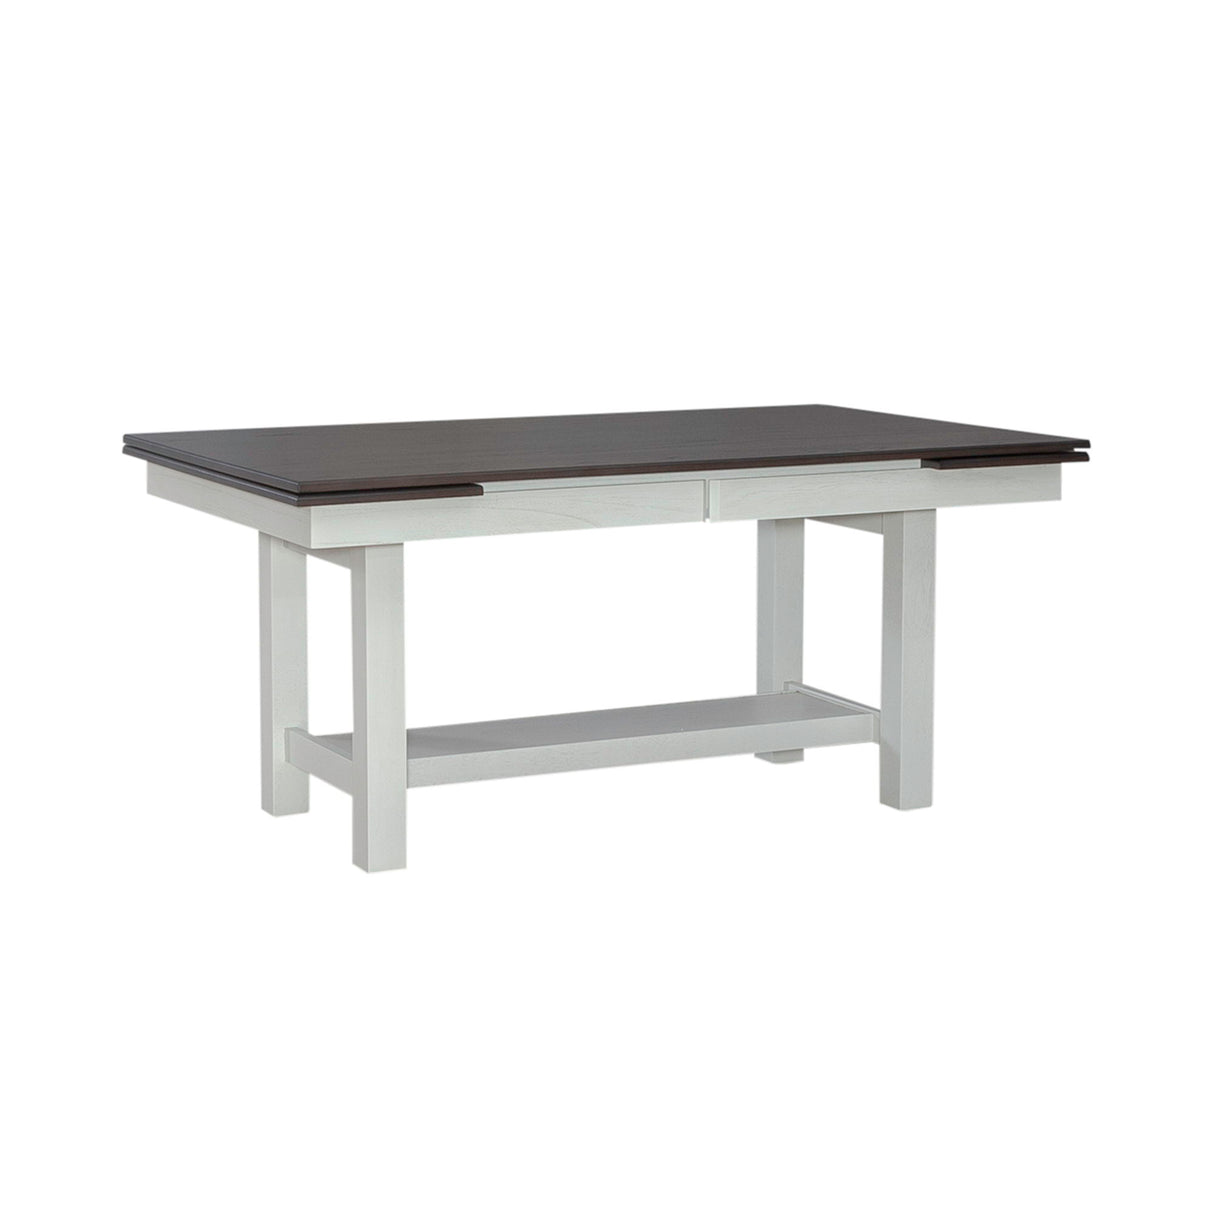 Brook Bay - Trestle Table - White & Brown